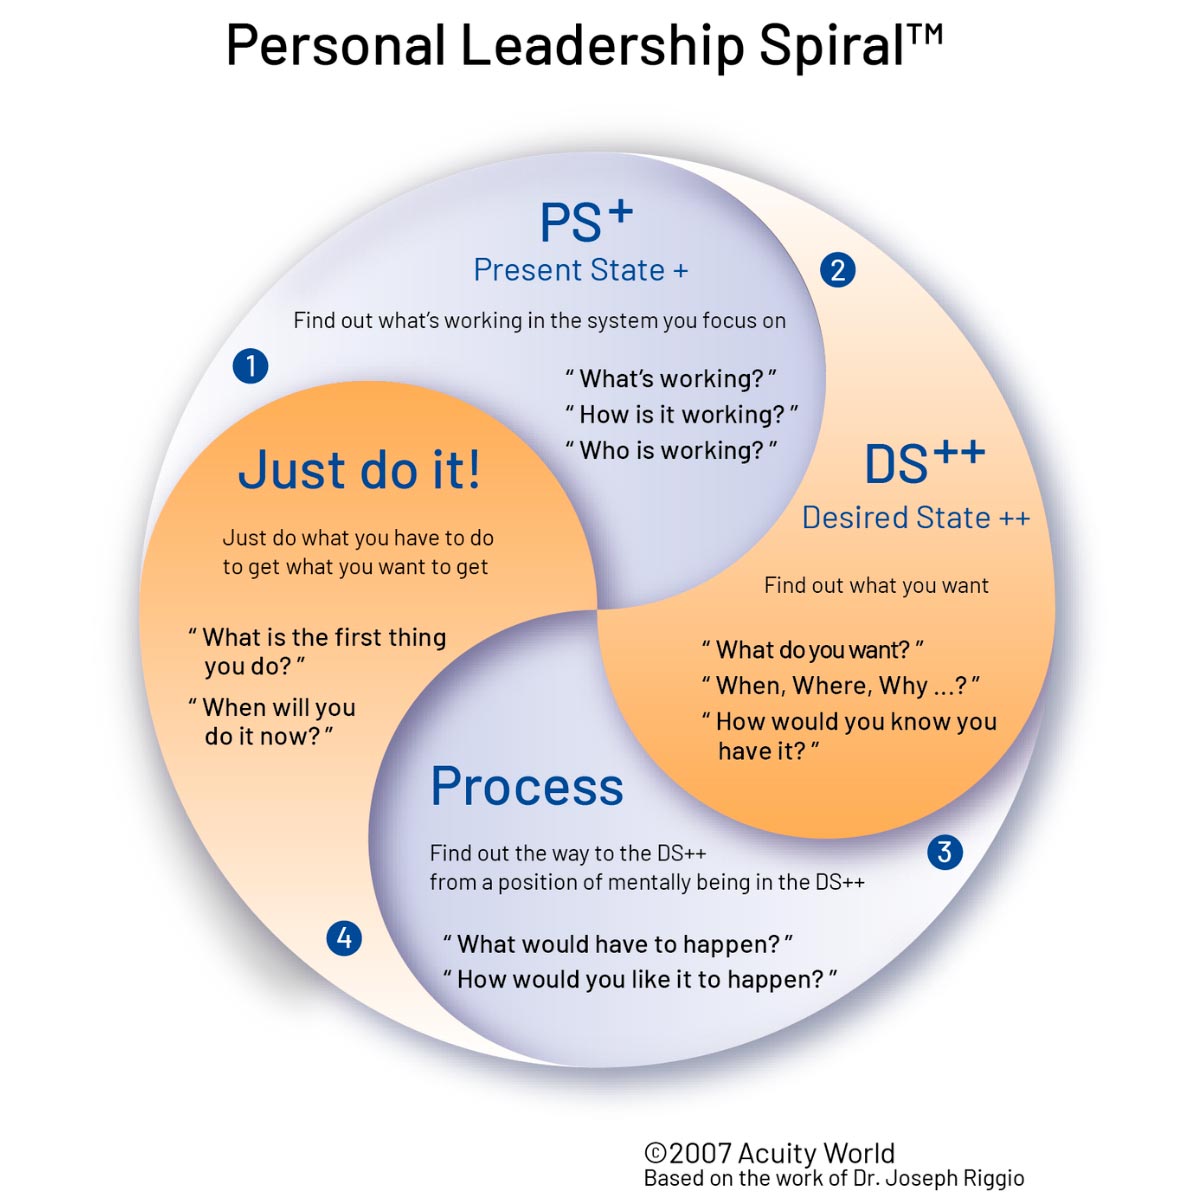 Personal Leadership Spiral. How create sustainable performance with employees and customers